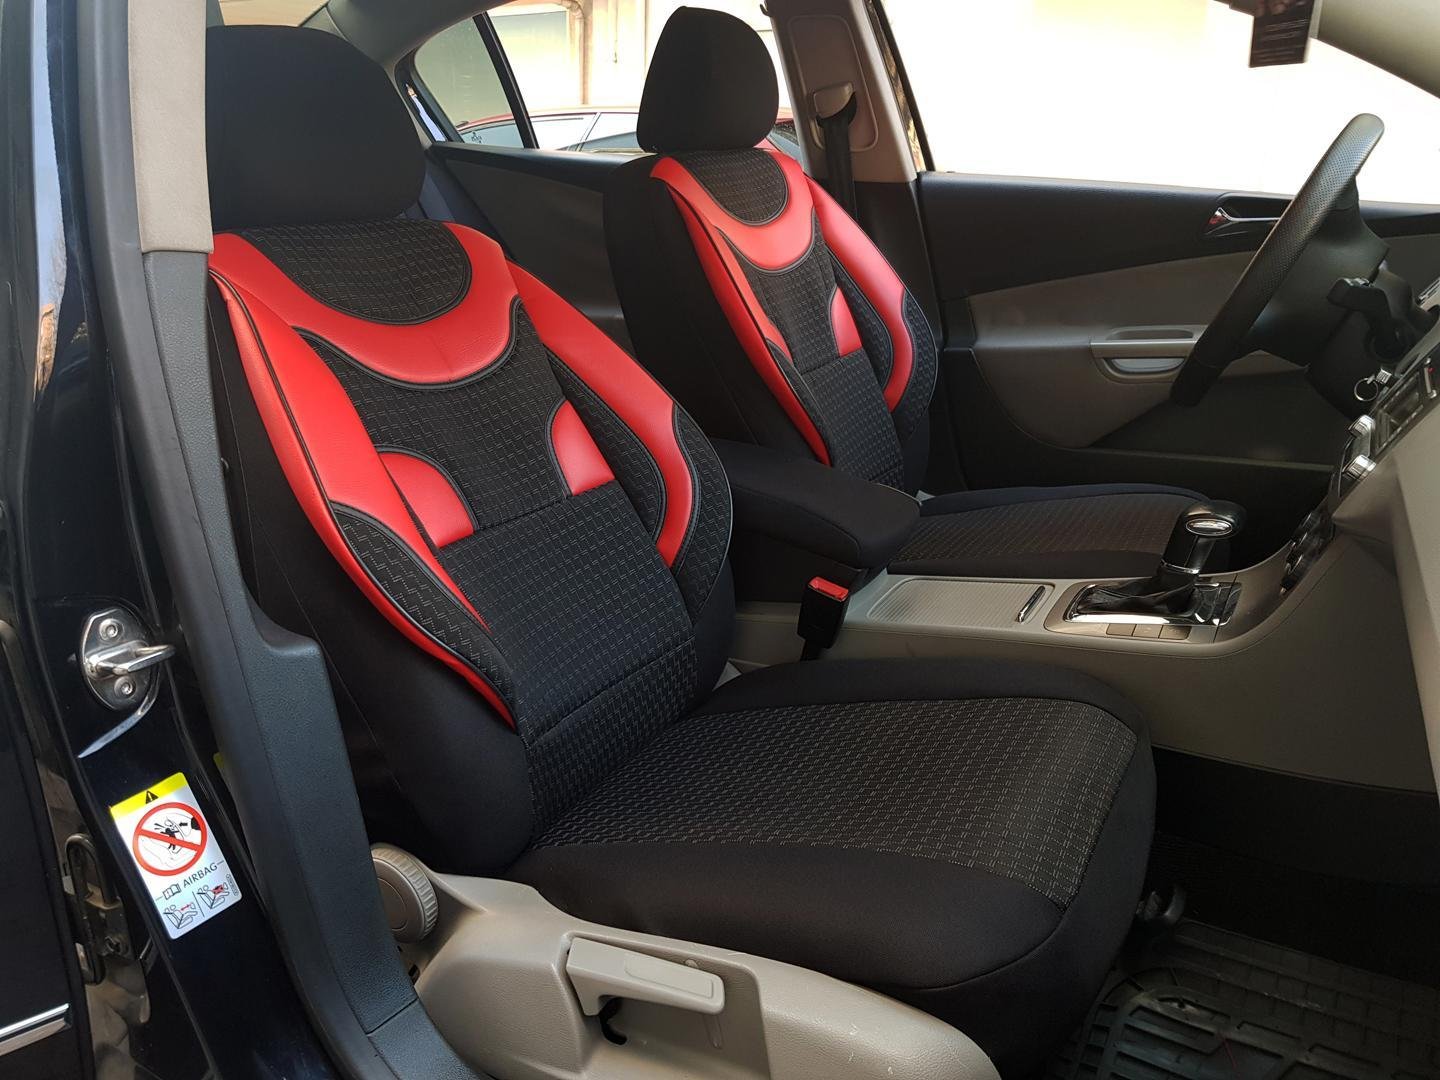 SINGLE BMW 1 SERIES  RED WATERPROOF FRONT SEAT COVER 